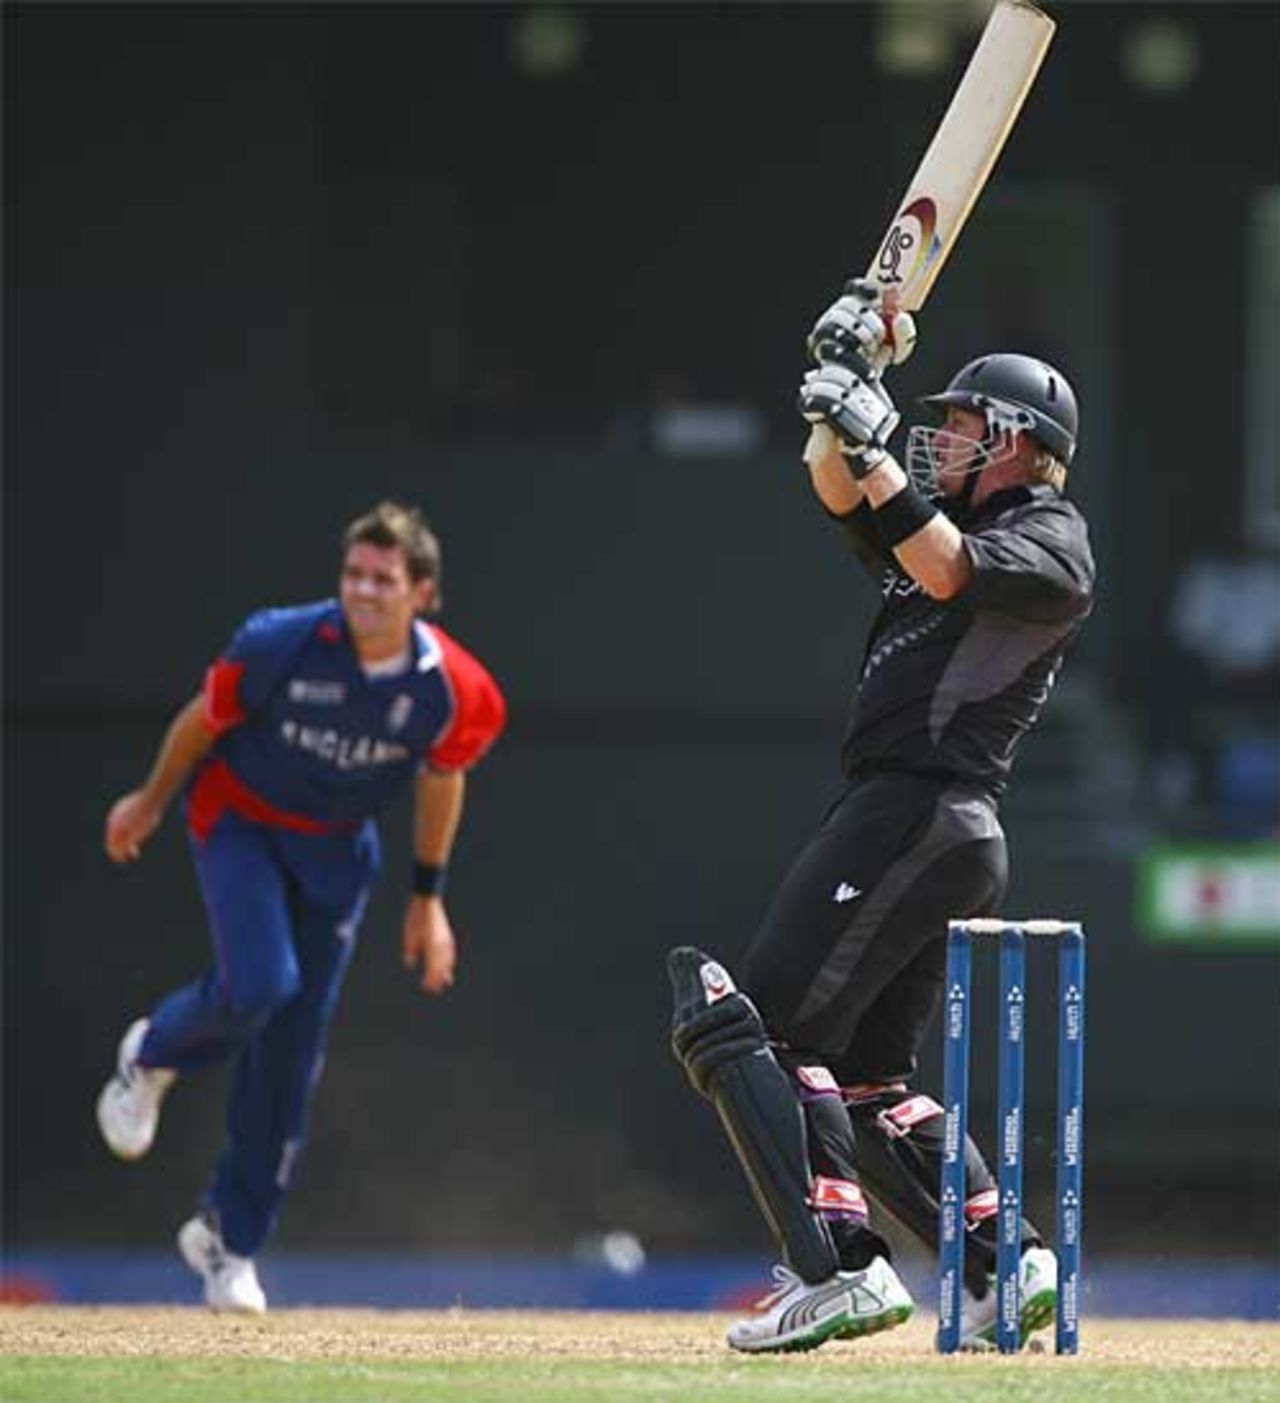 Scott Styris led New Zealand's reply, picking up the pieces after an early clatter, England v New Zealand, Group C, Gros Islet, March 16, 2007